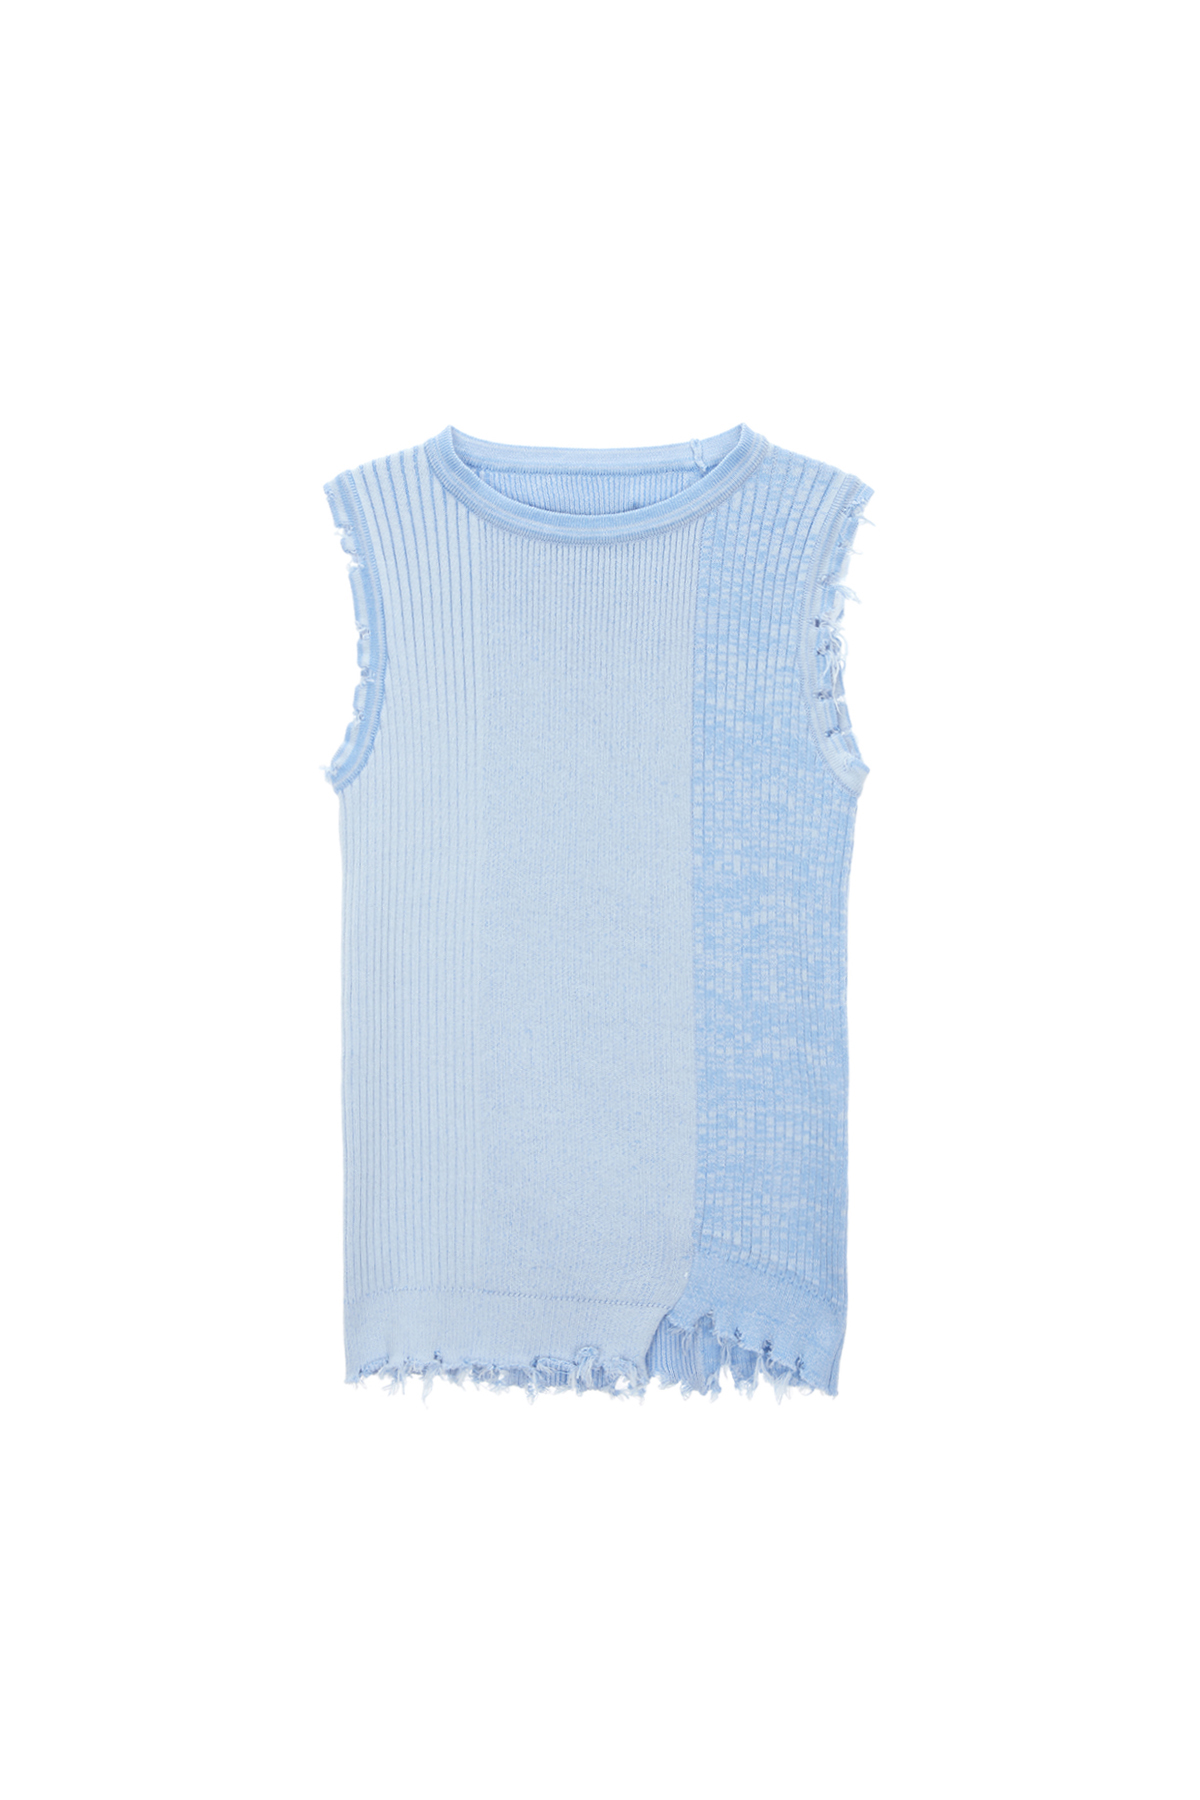 DAMAGE SLEEVELESS KNIT TOP IN SKY